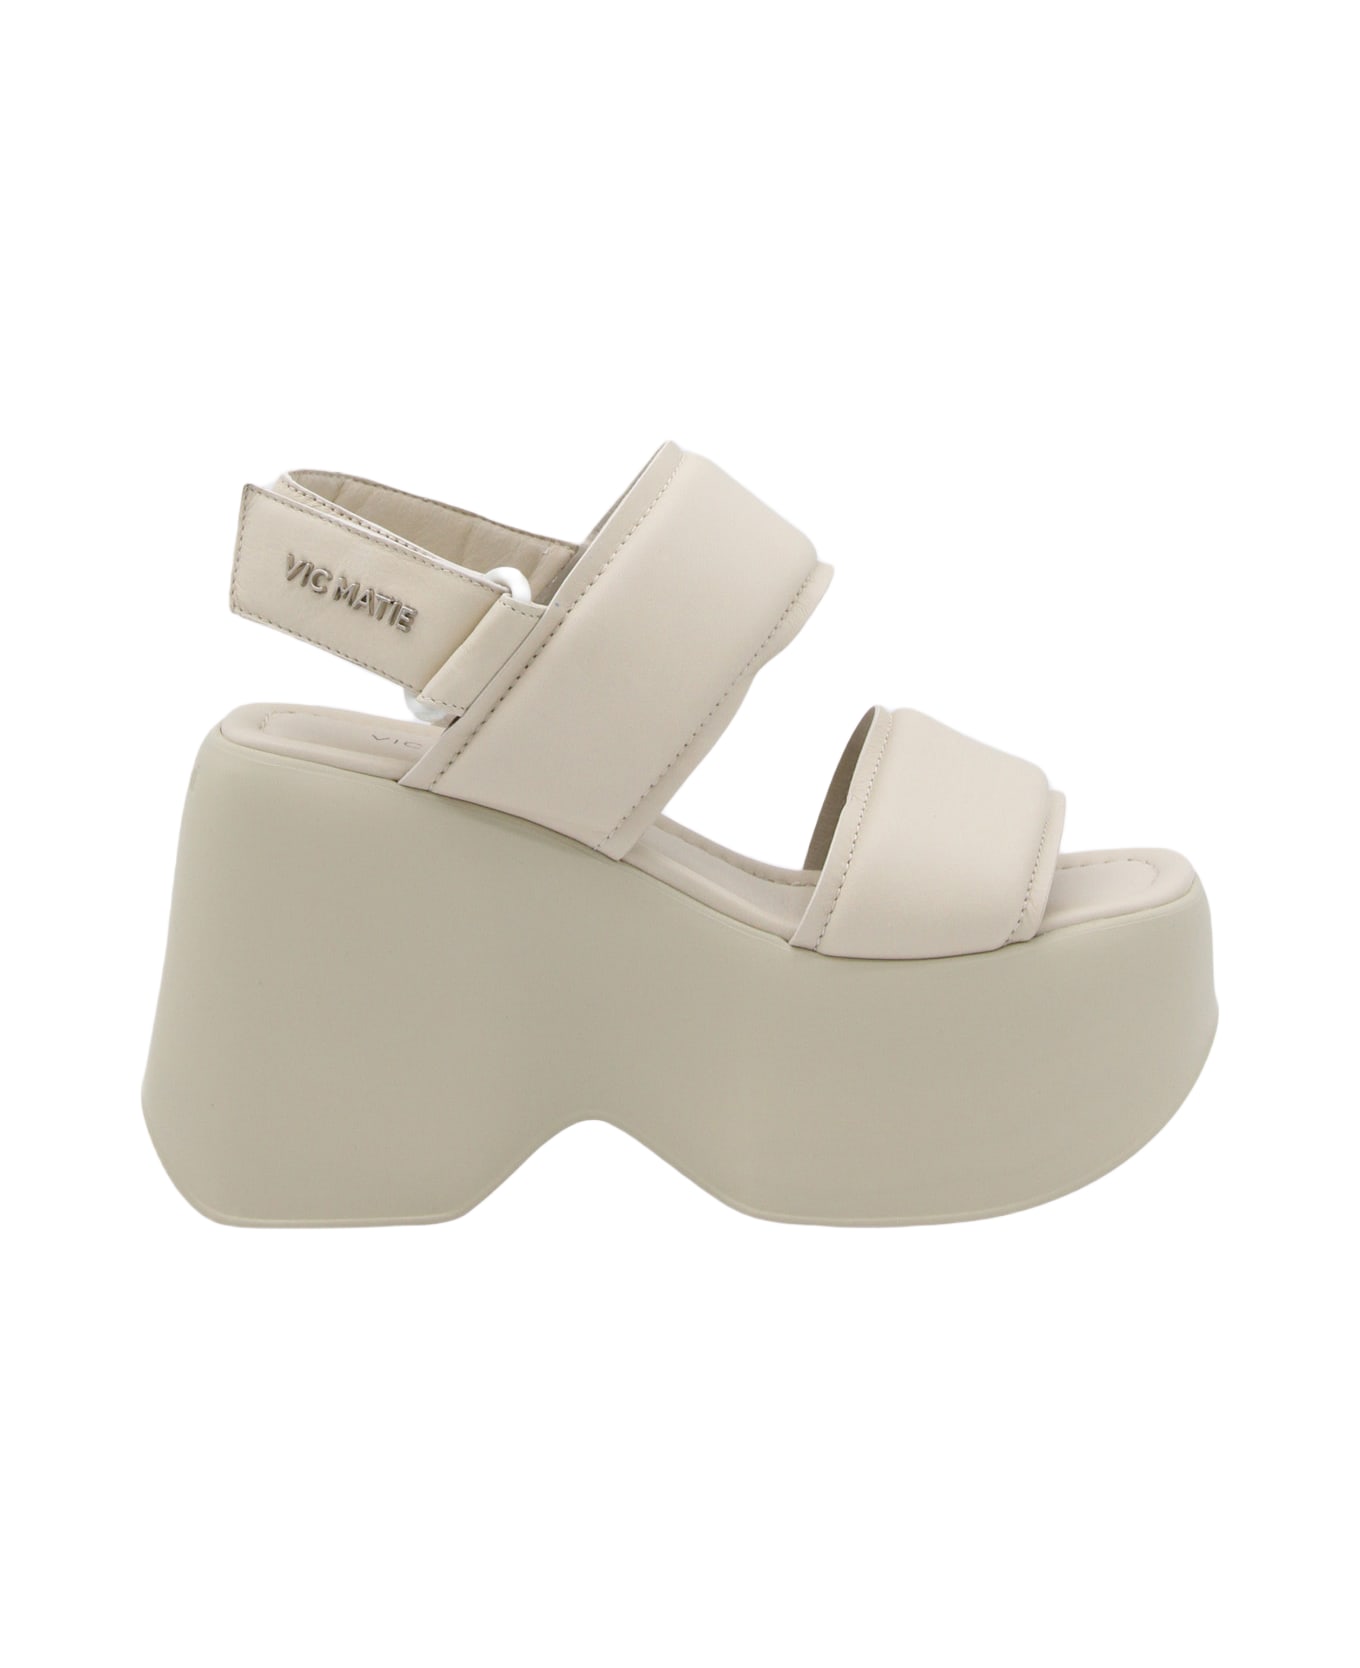 Vic Matié White Leather Platfrom Sandals - Osso